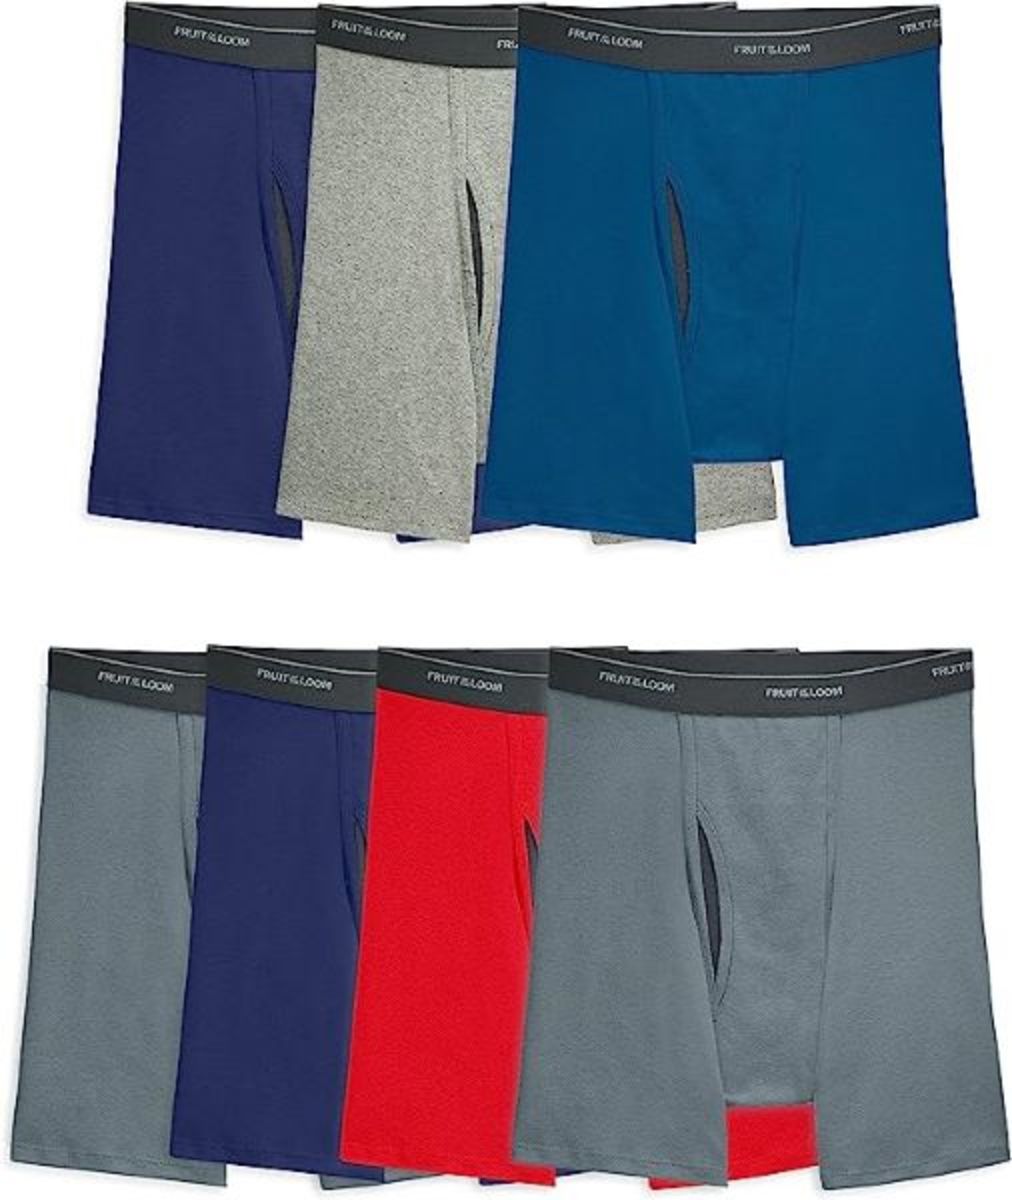 Boxer briefs in blue, gray, and red